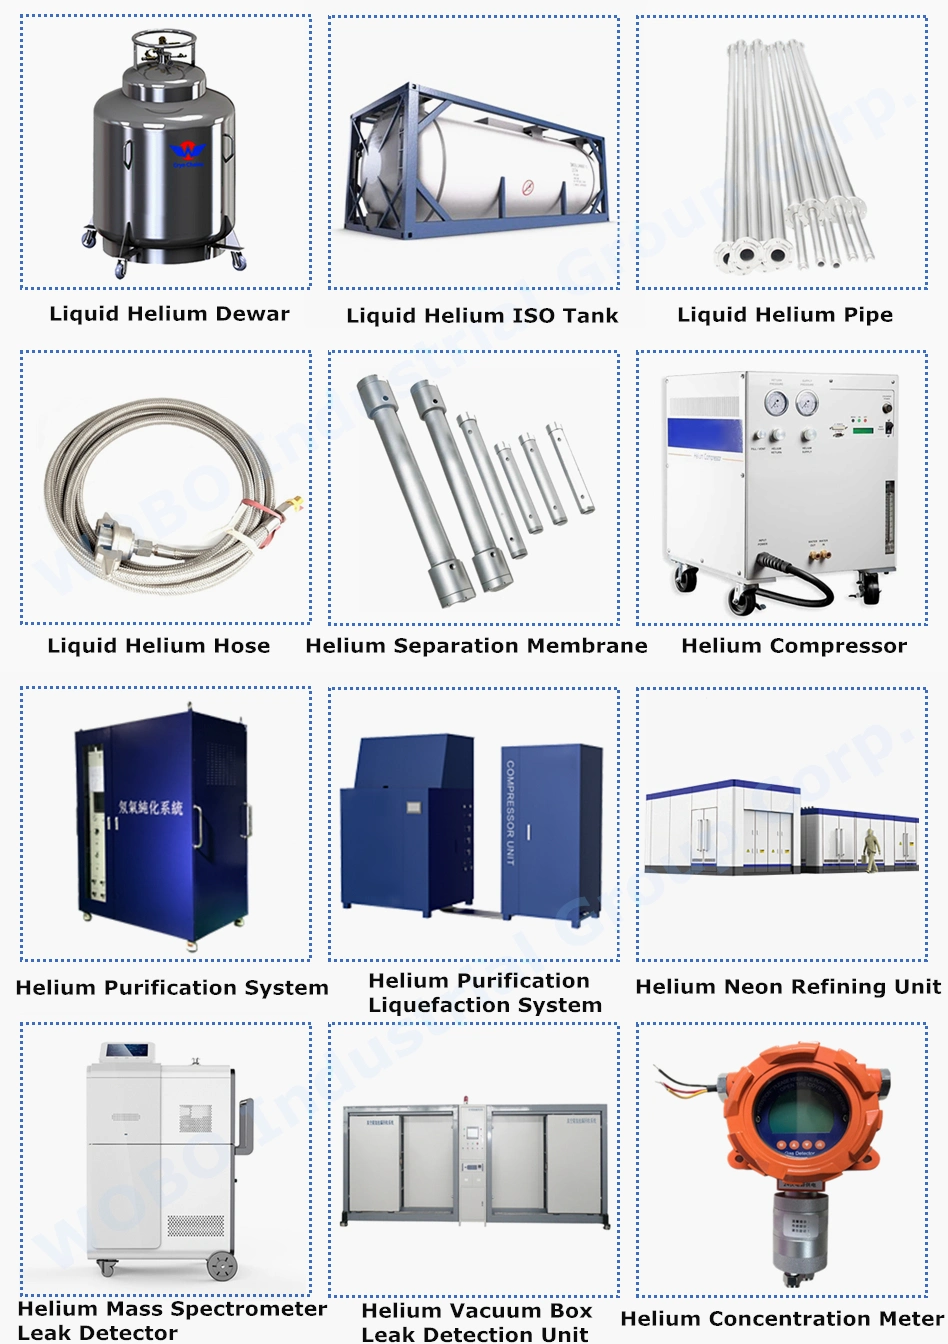 He Membrane Helium Separation Extraction Device with Helium Liquefier Refrigerator